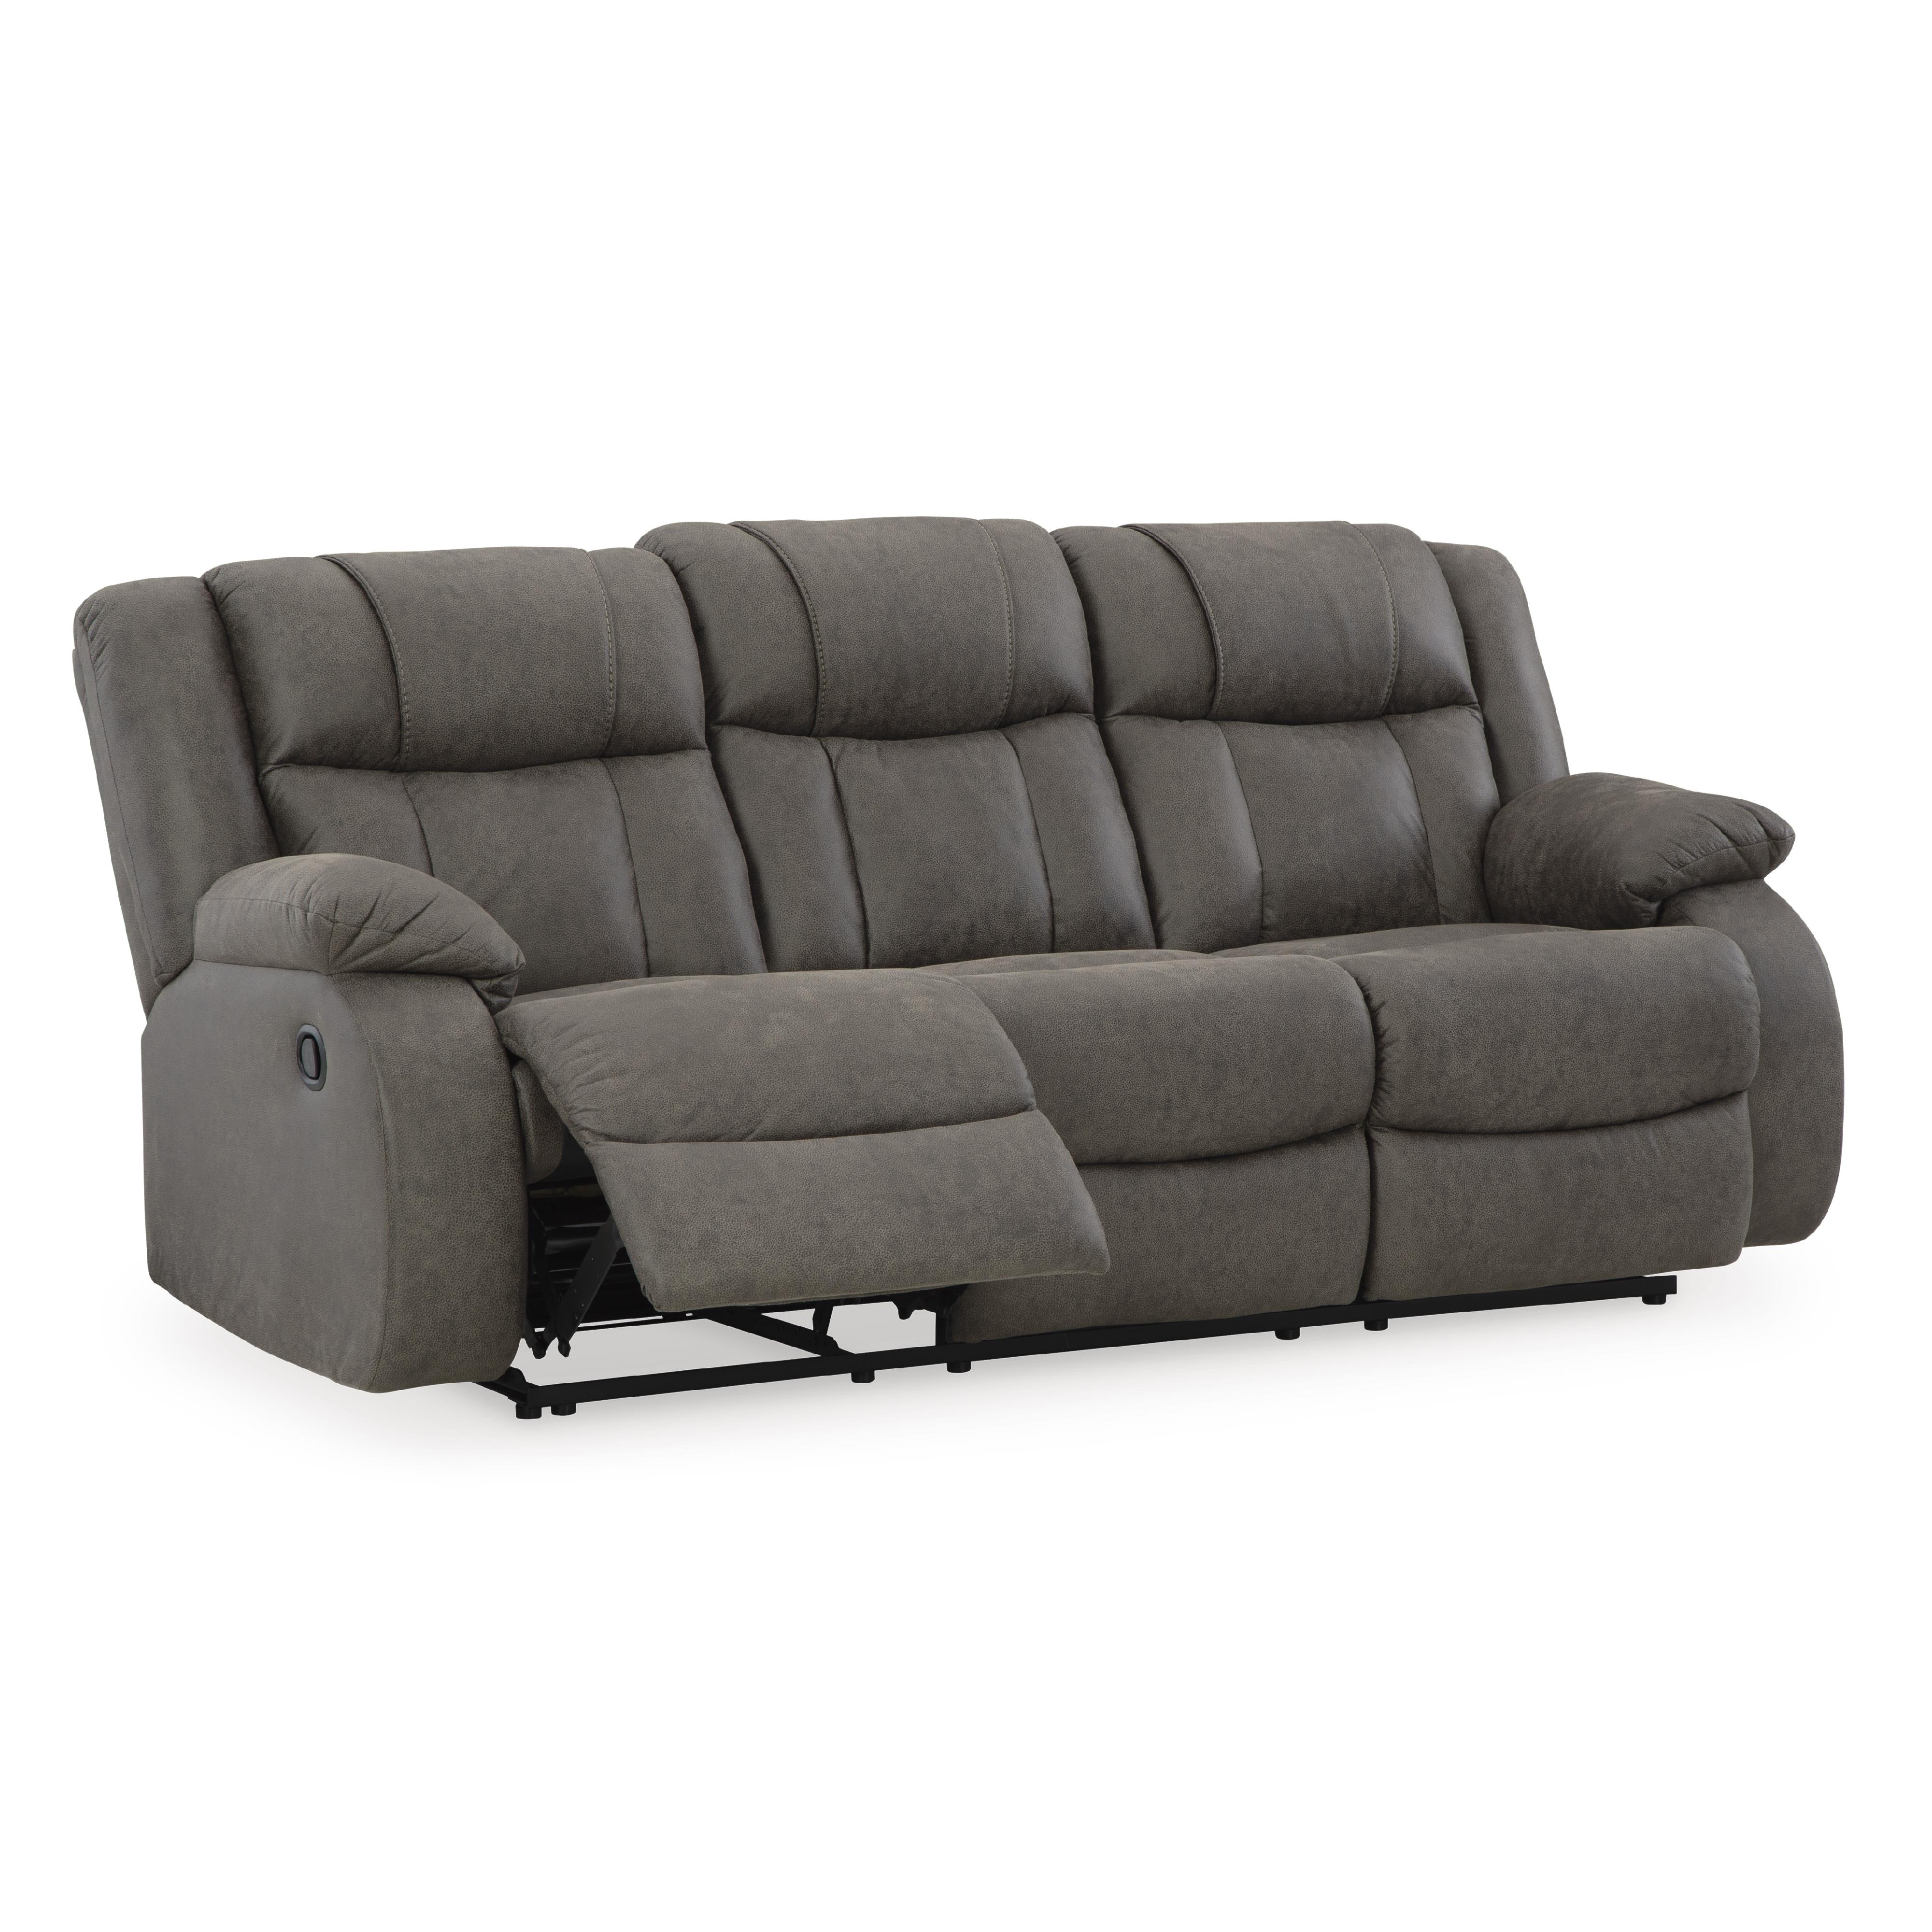 Signature Design by Ashley First Base Reclining Leather Look Sofa 6880488 IMAGE 2